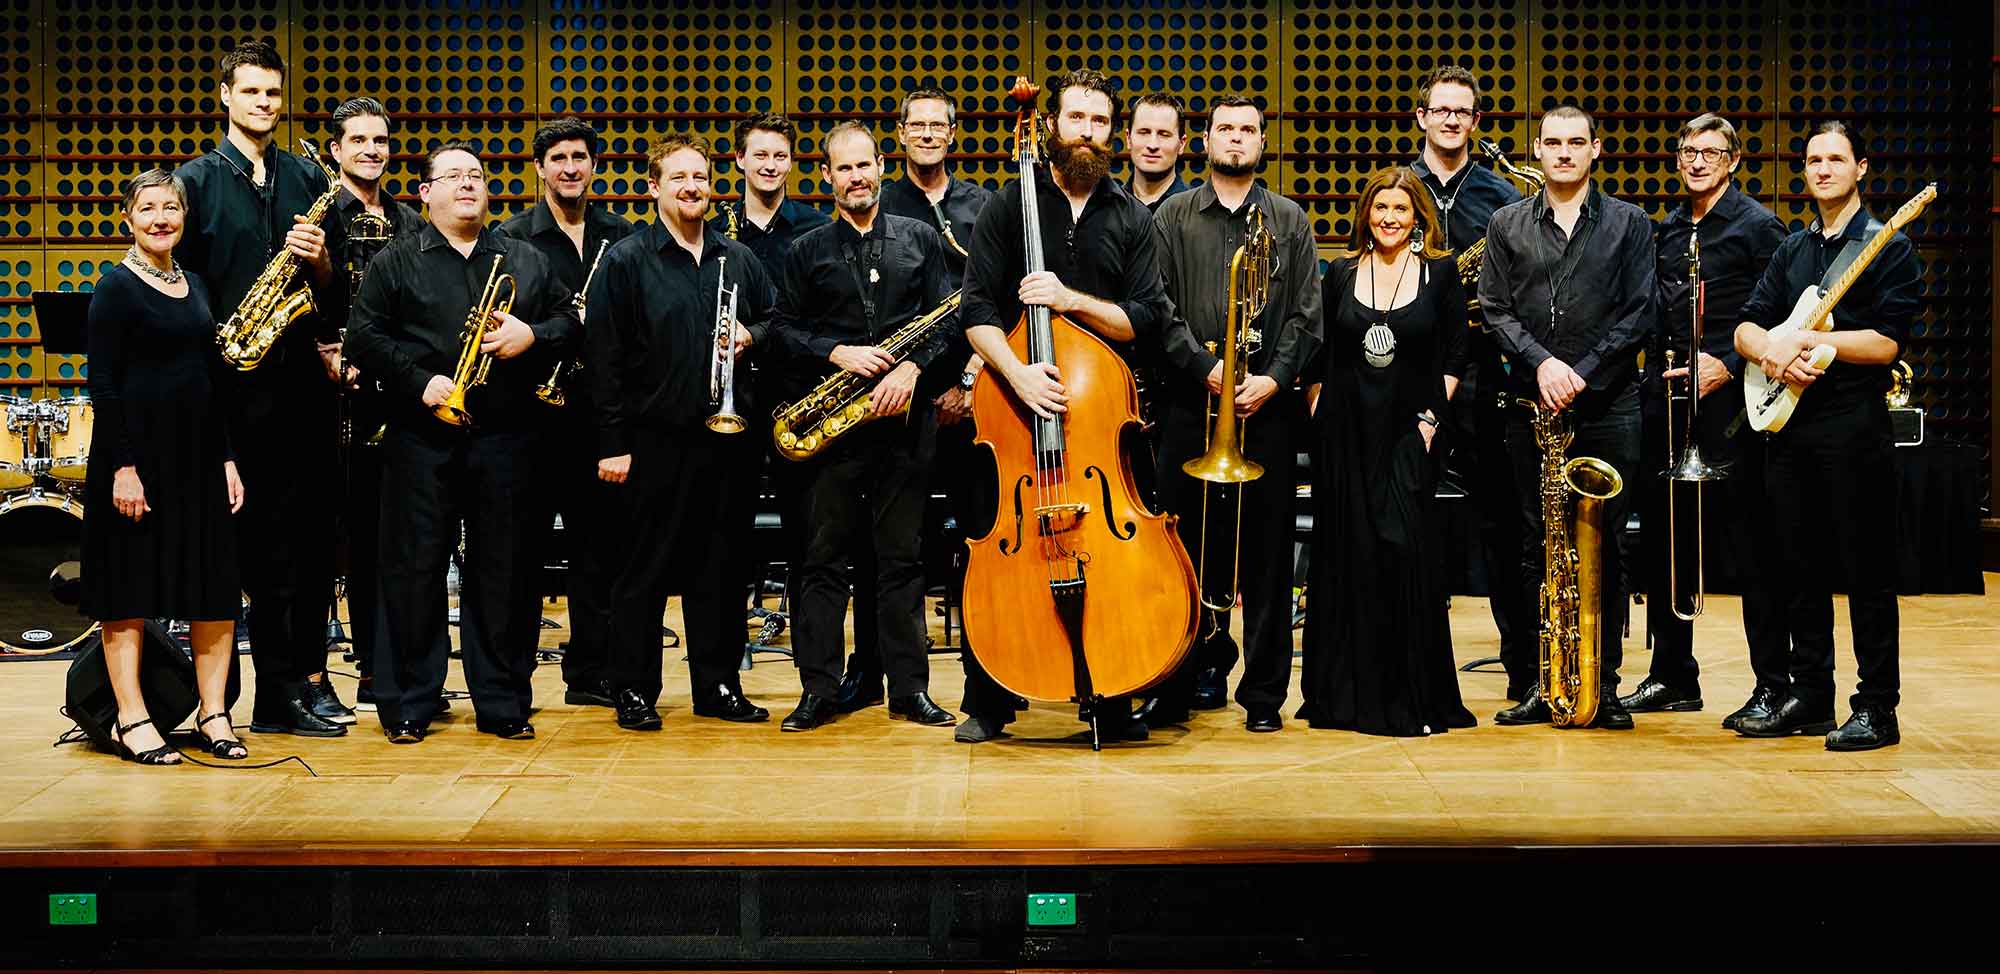 An image of the Brisbane Jazz Orchestra members standing on a stage with their instruments.